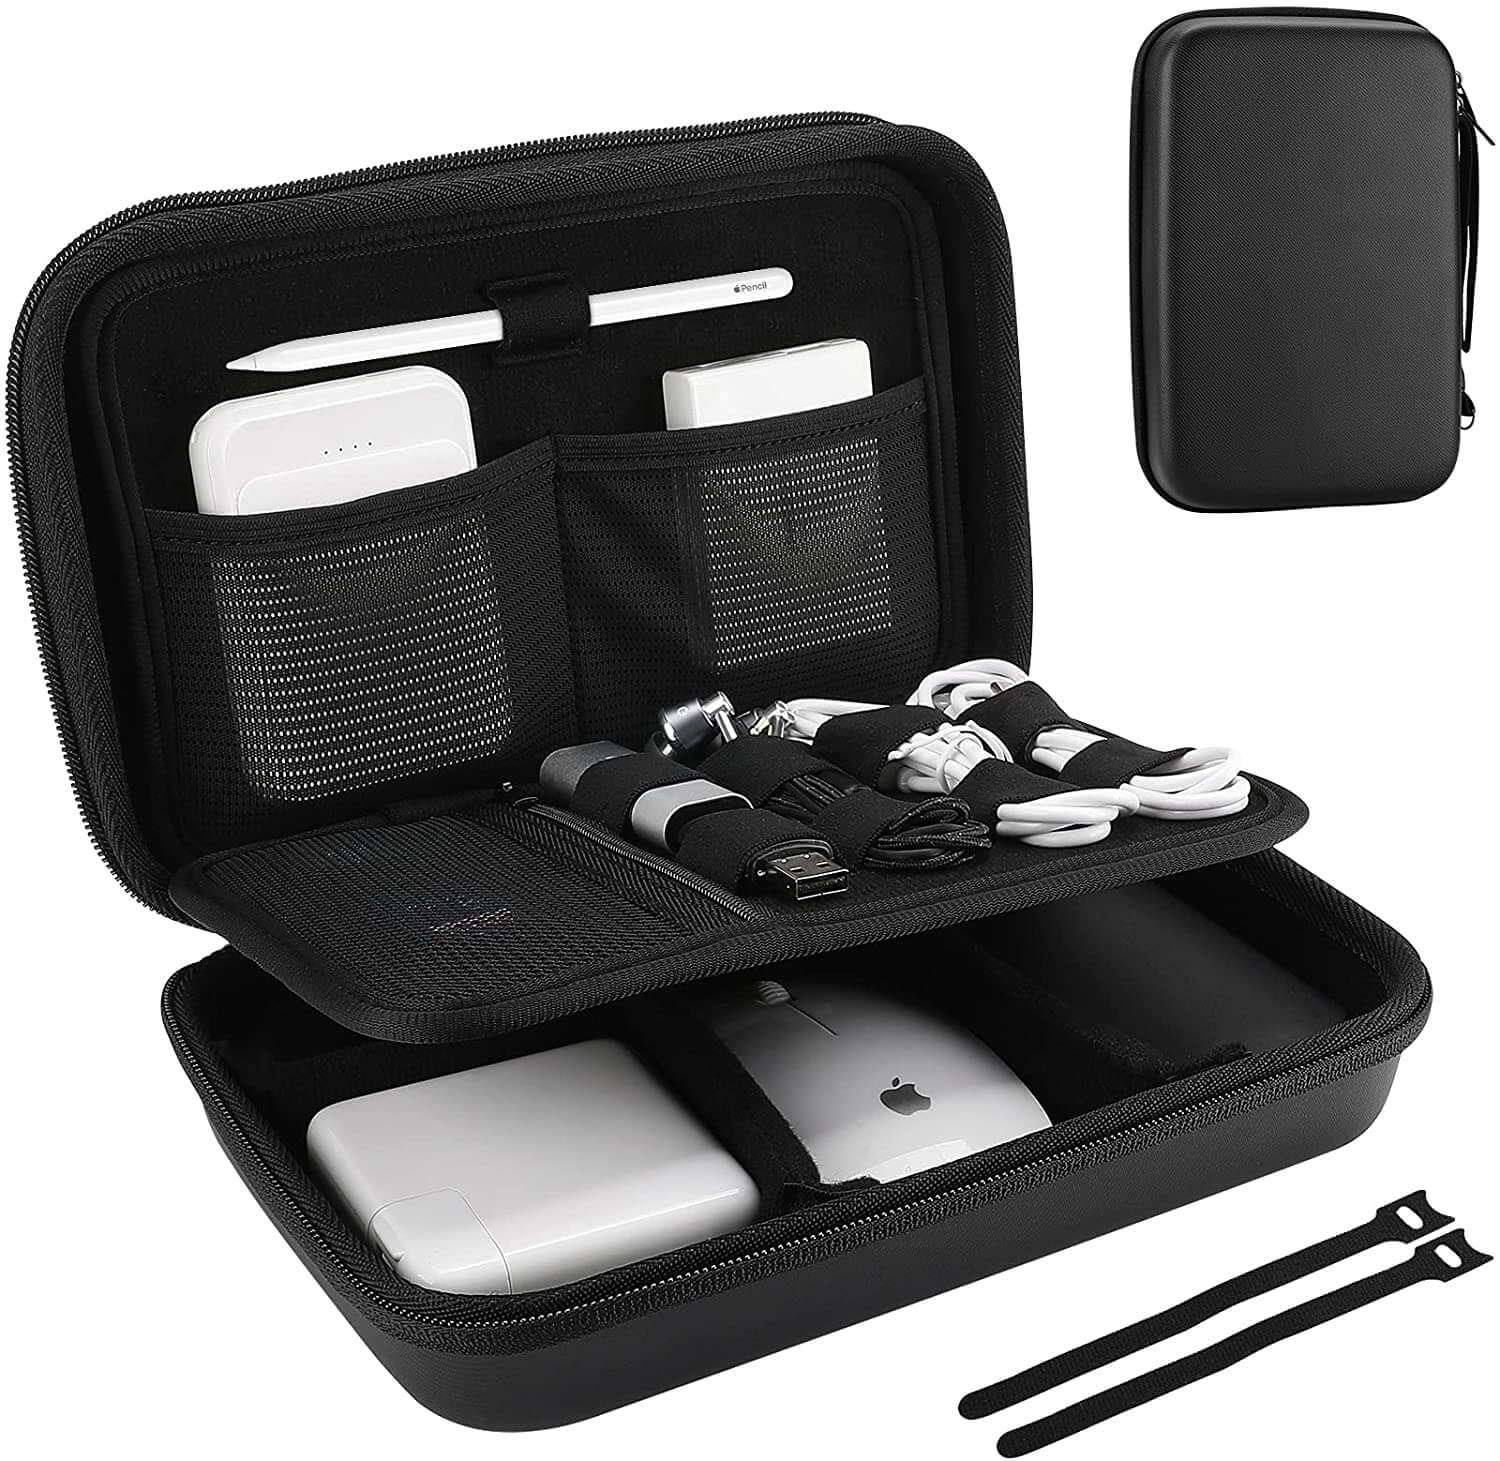 BUBM 11 Travel Gear Electronic Cable Organizer Case Accessories